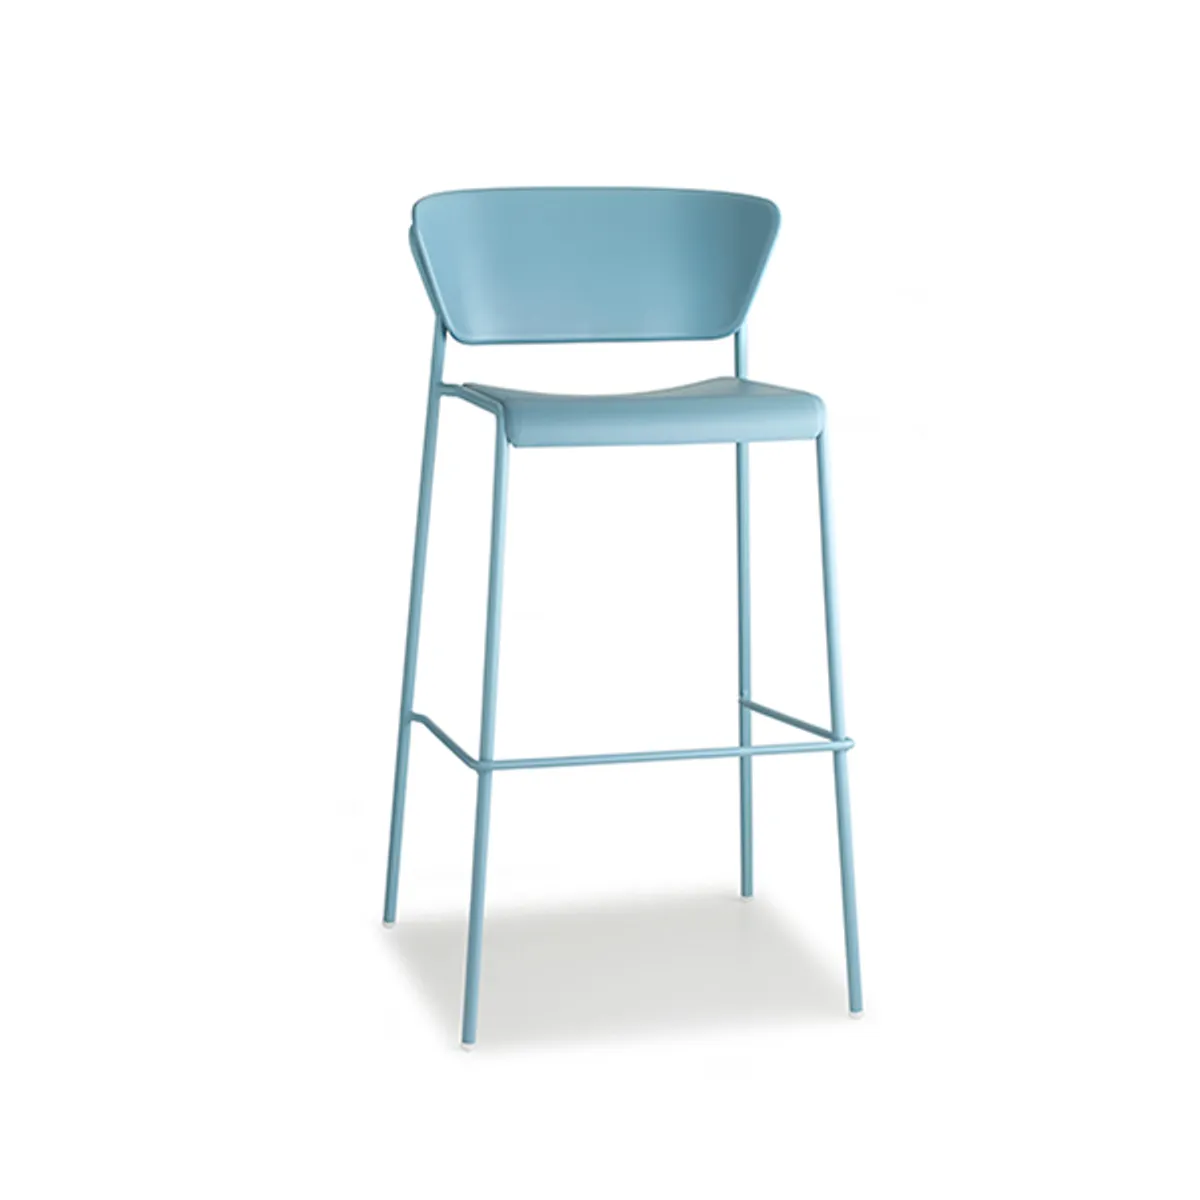 Robyn Soft Outdoor Bar Stool Cafe Furniture Insideoutcontracts 022